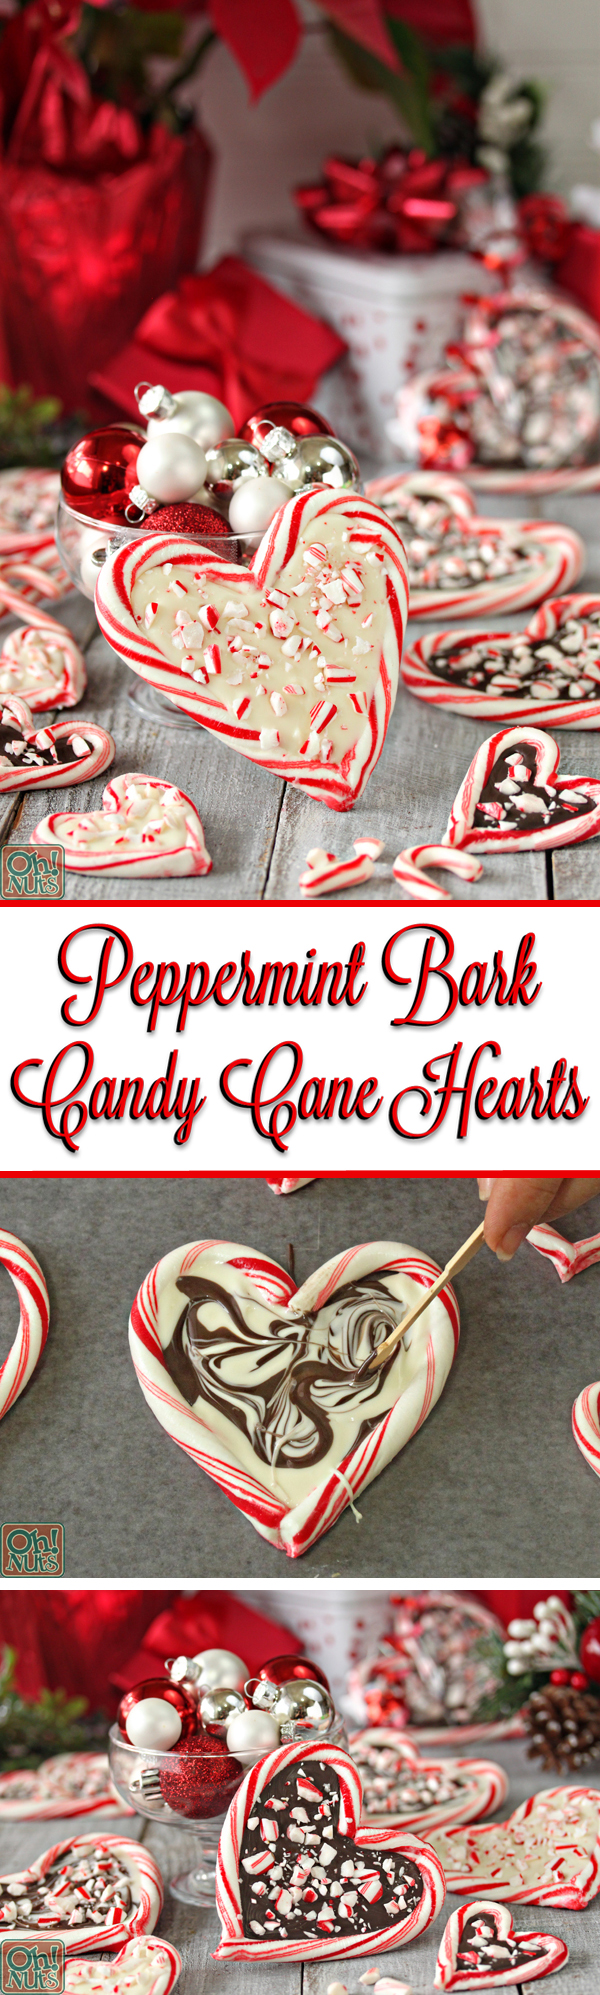 Peppermint Bark Candy Cane Hearts | From OhNuts.com